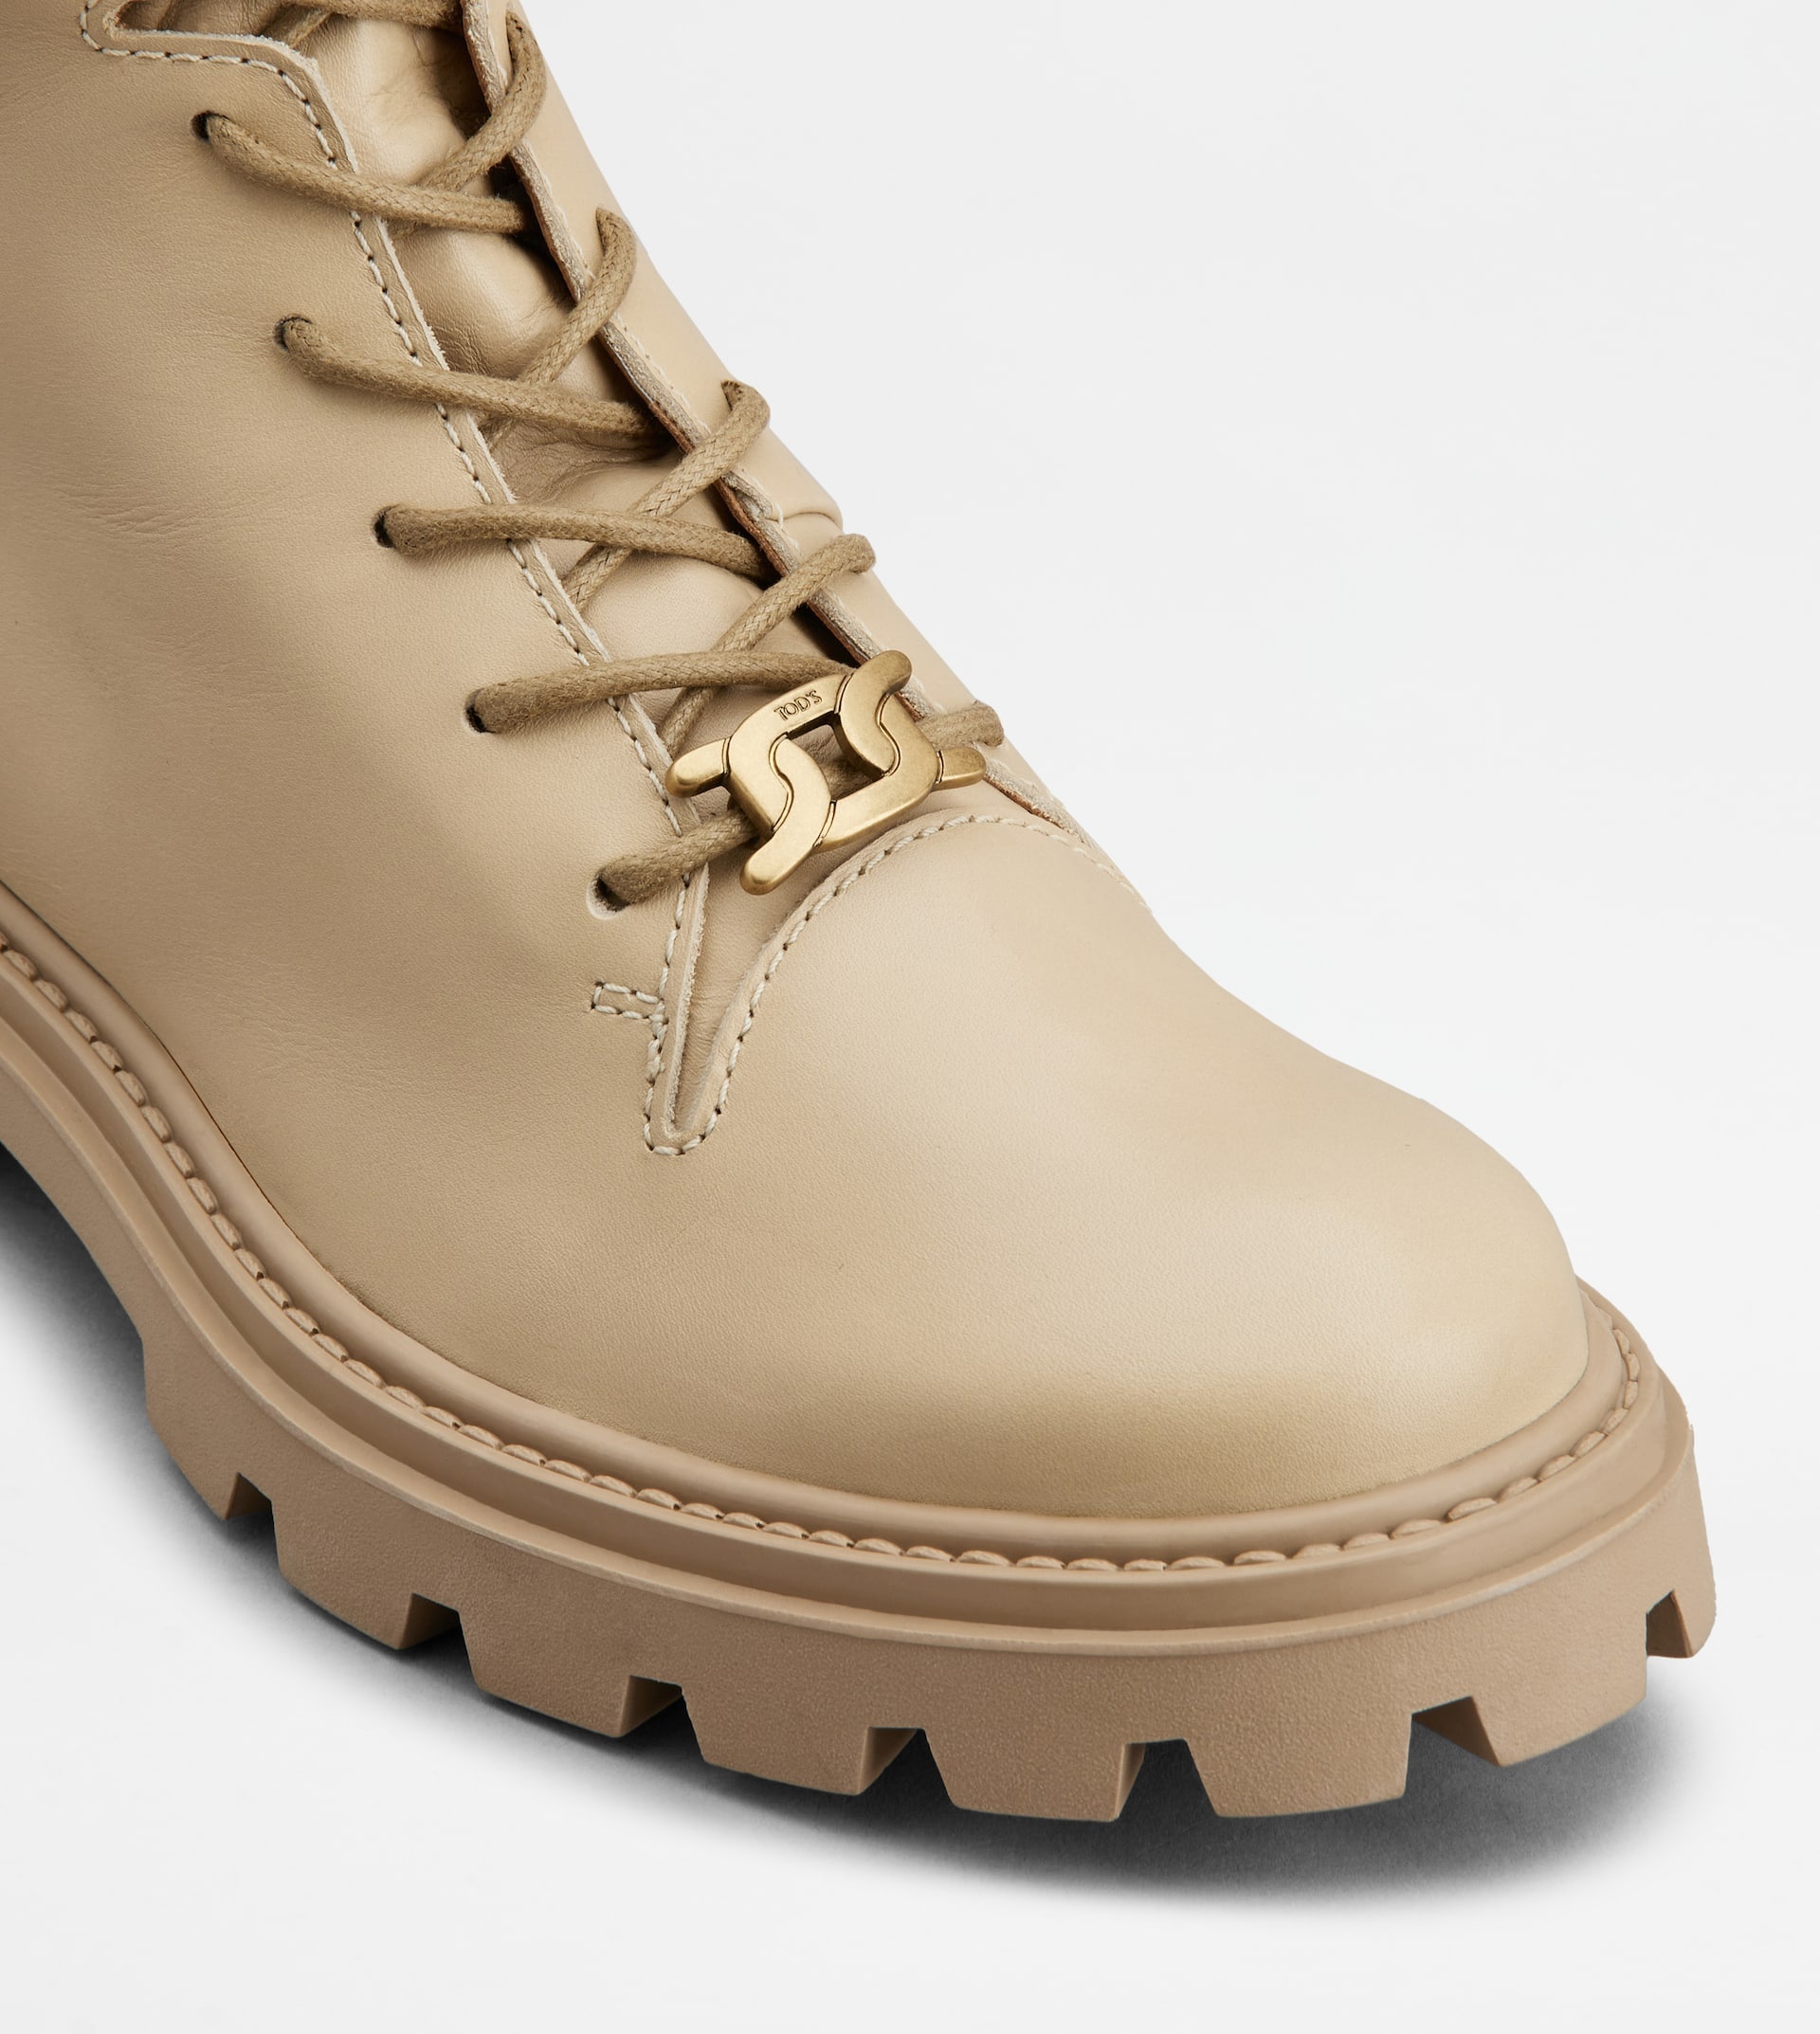 COMBAT BOOTS IN LEATHER - BEIGE - 5